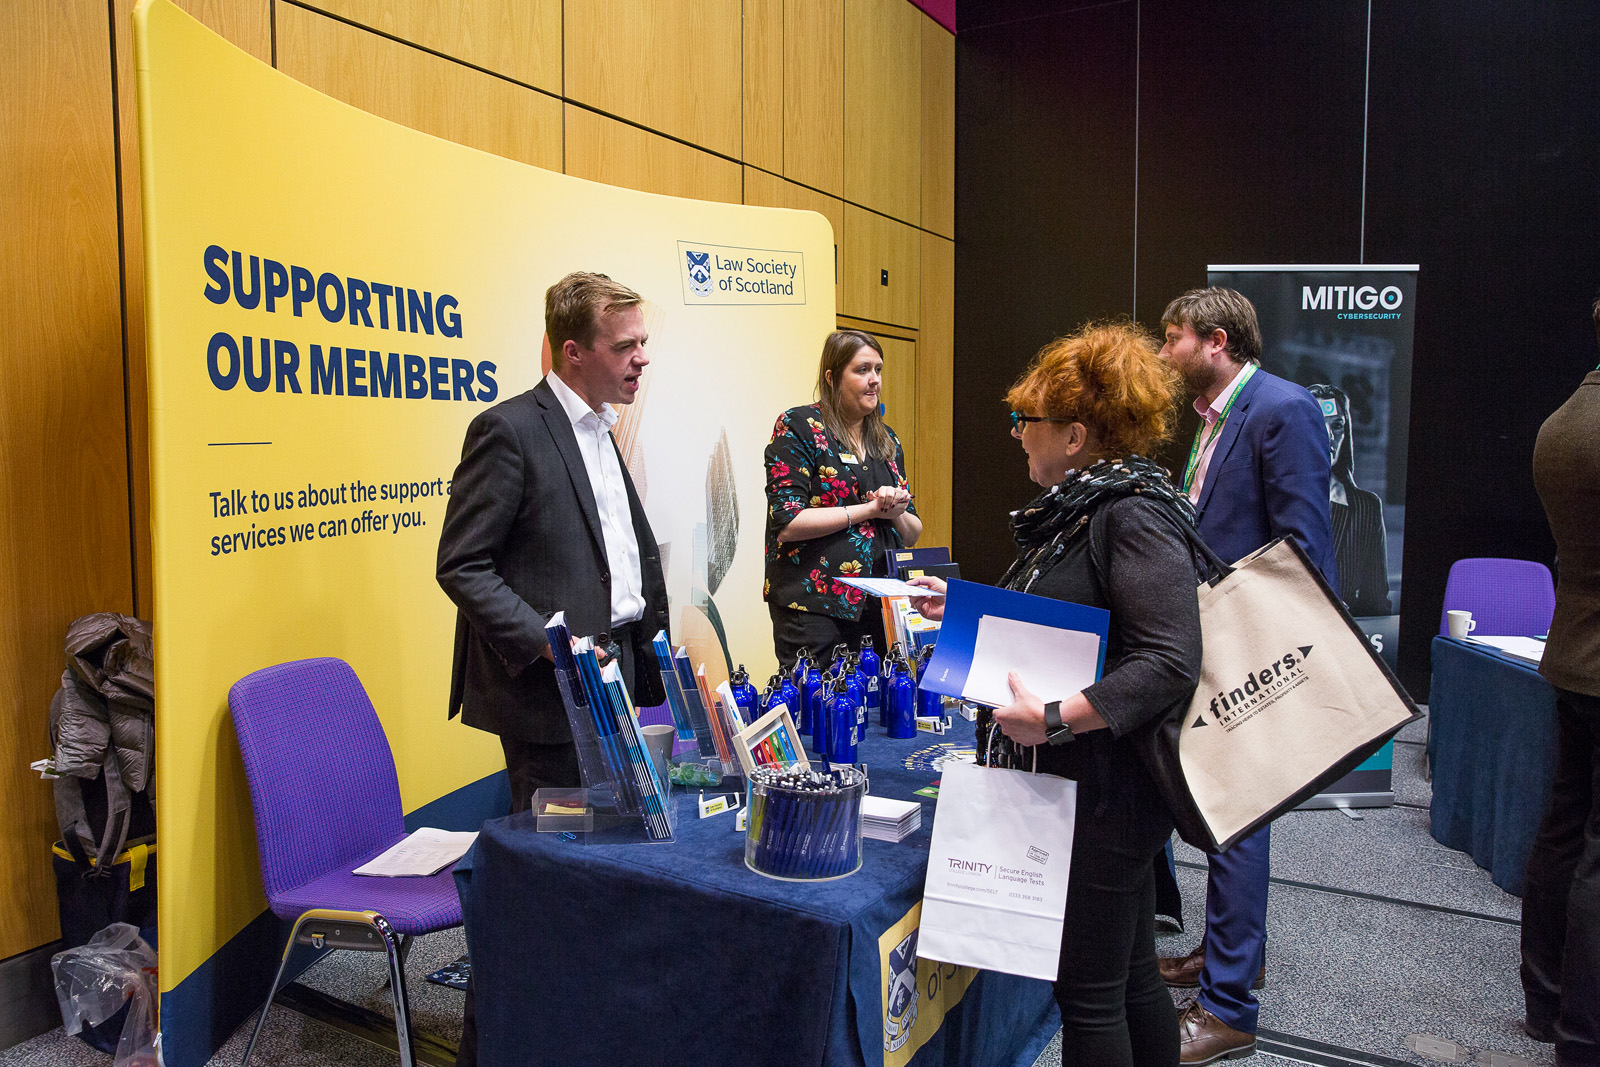 Members of the Society team talk to delegates at the conference